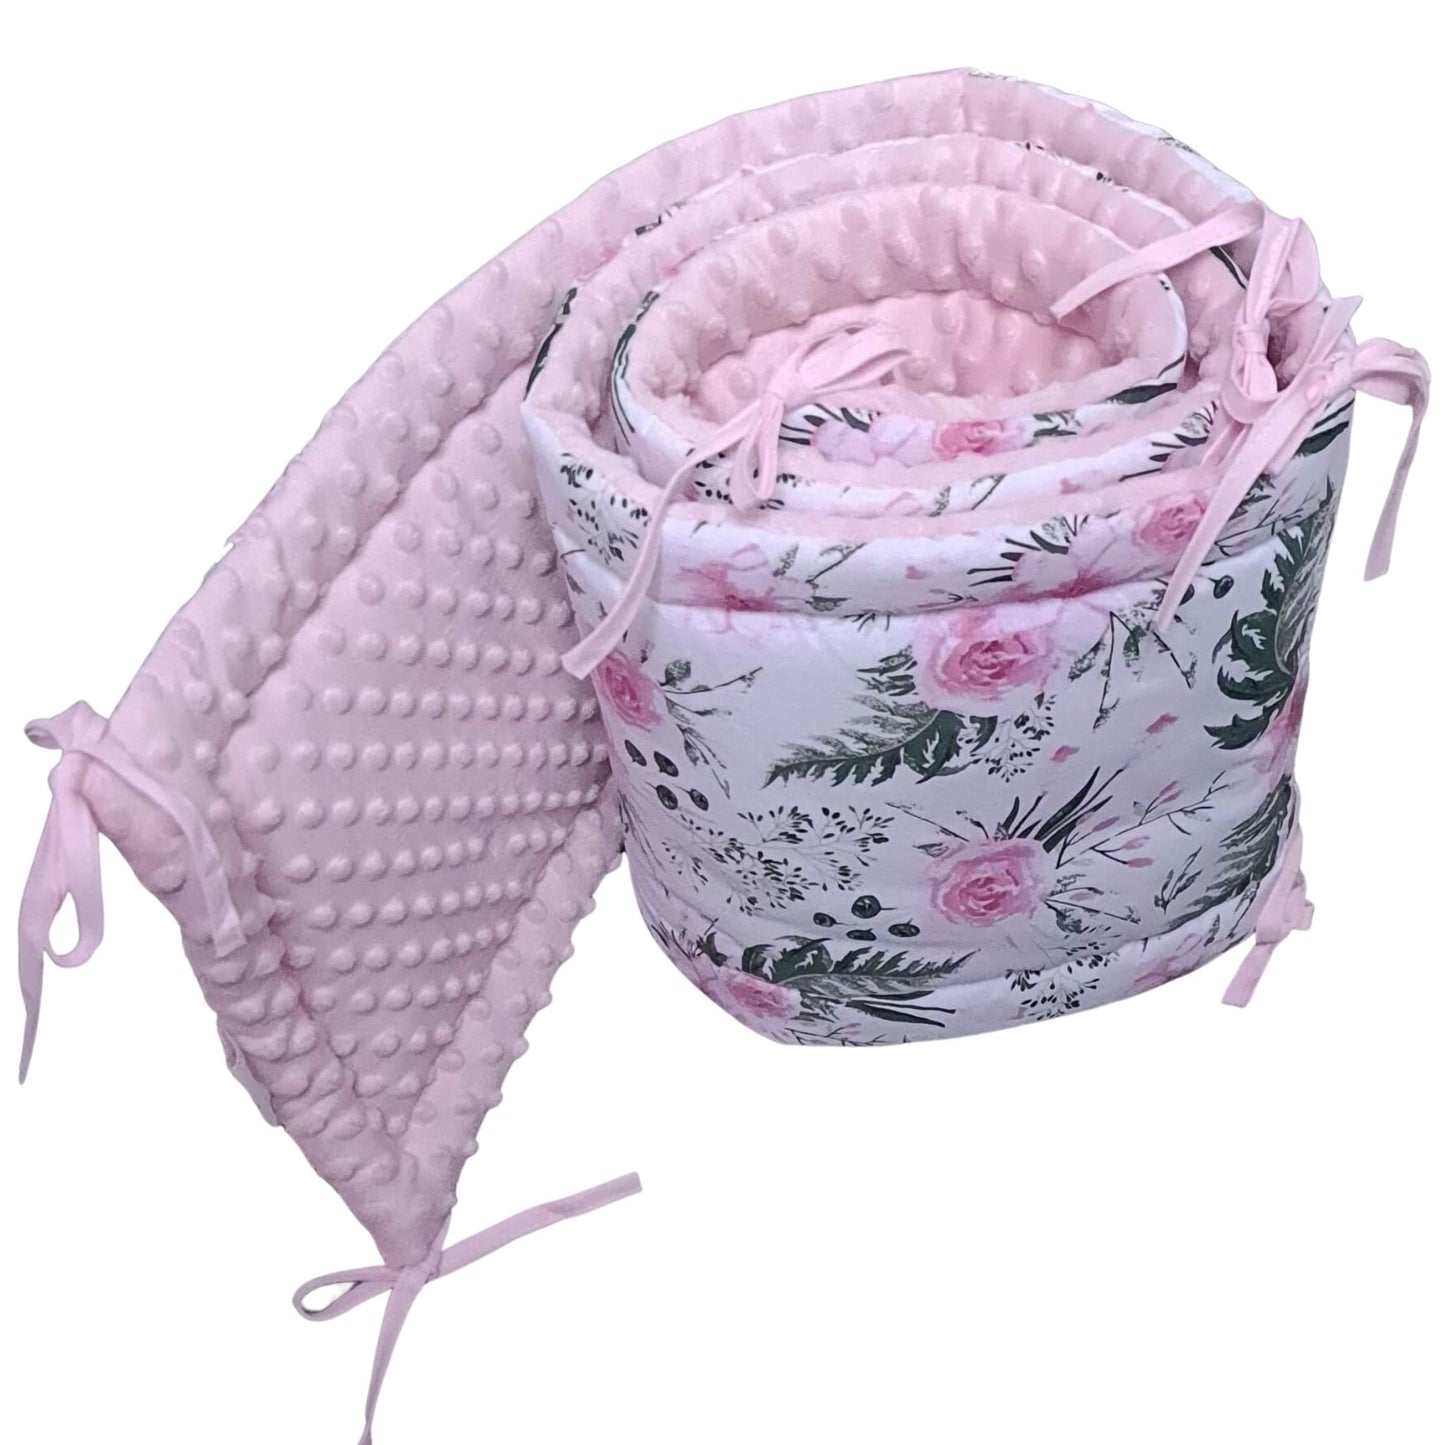 Cot and Cot bed Bumper Pink Roses